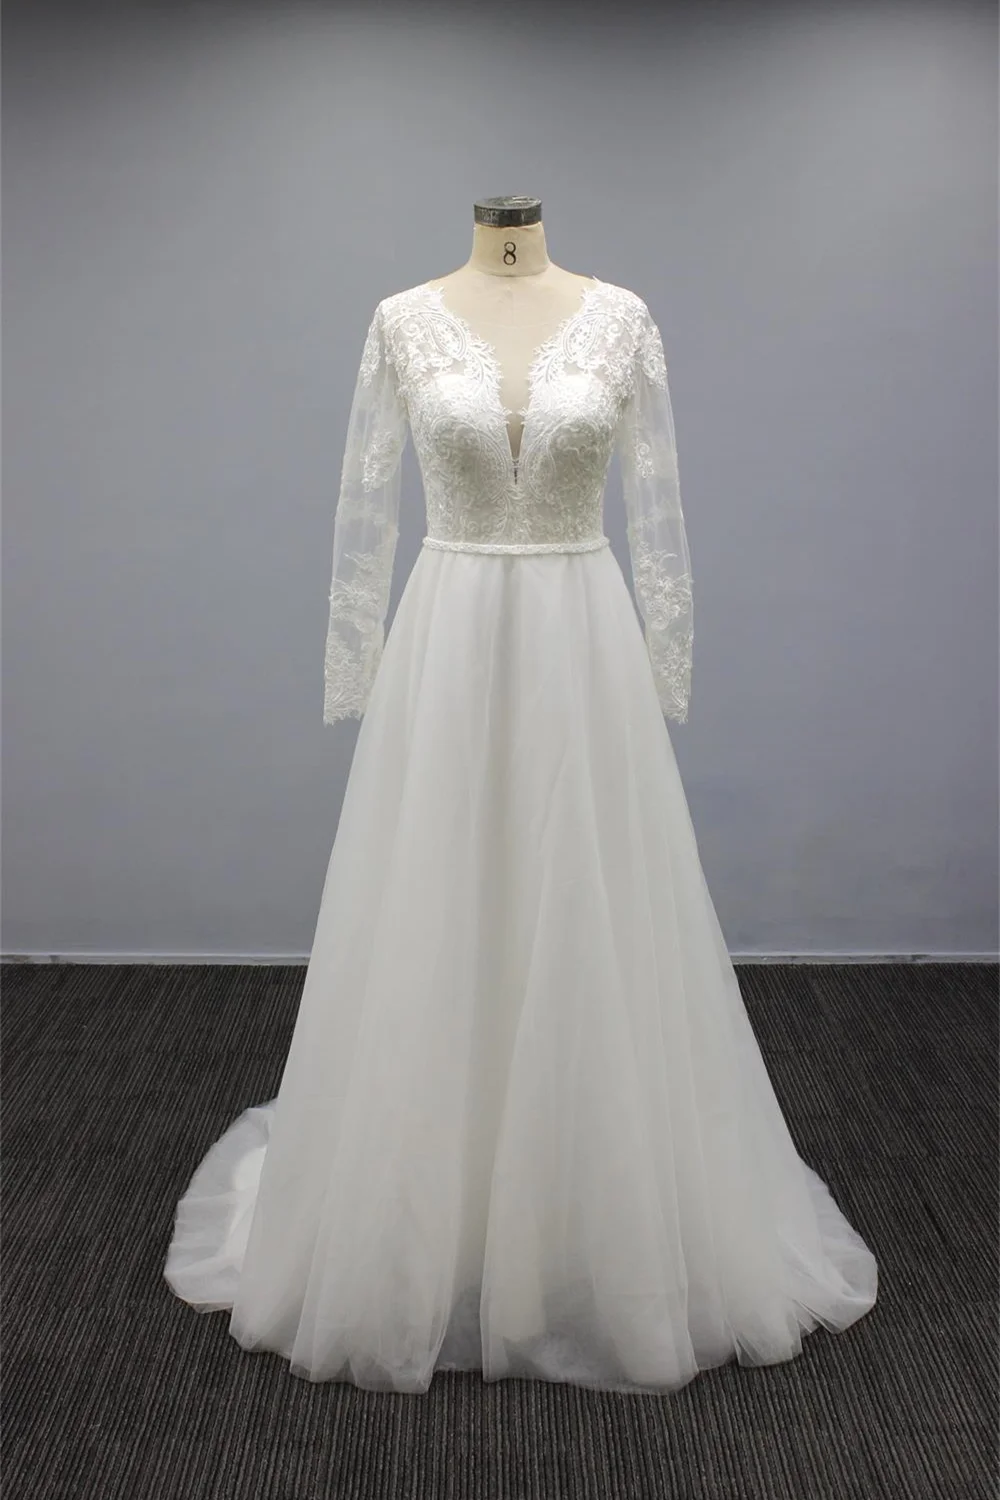 Daisda White A Line Long Sleeves Tulle Wedding Dress Chiffon V Neck With Appliques 